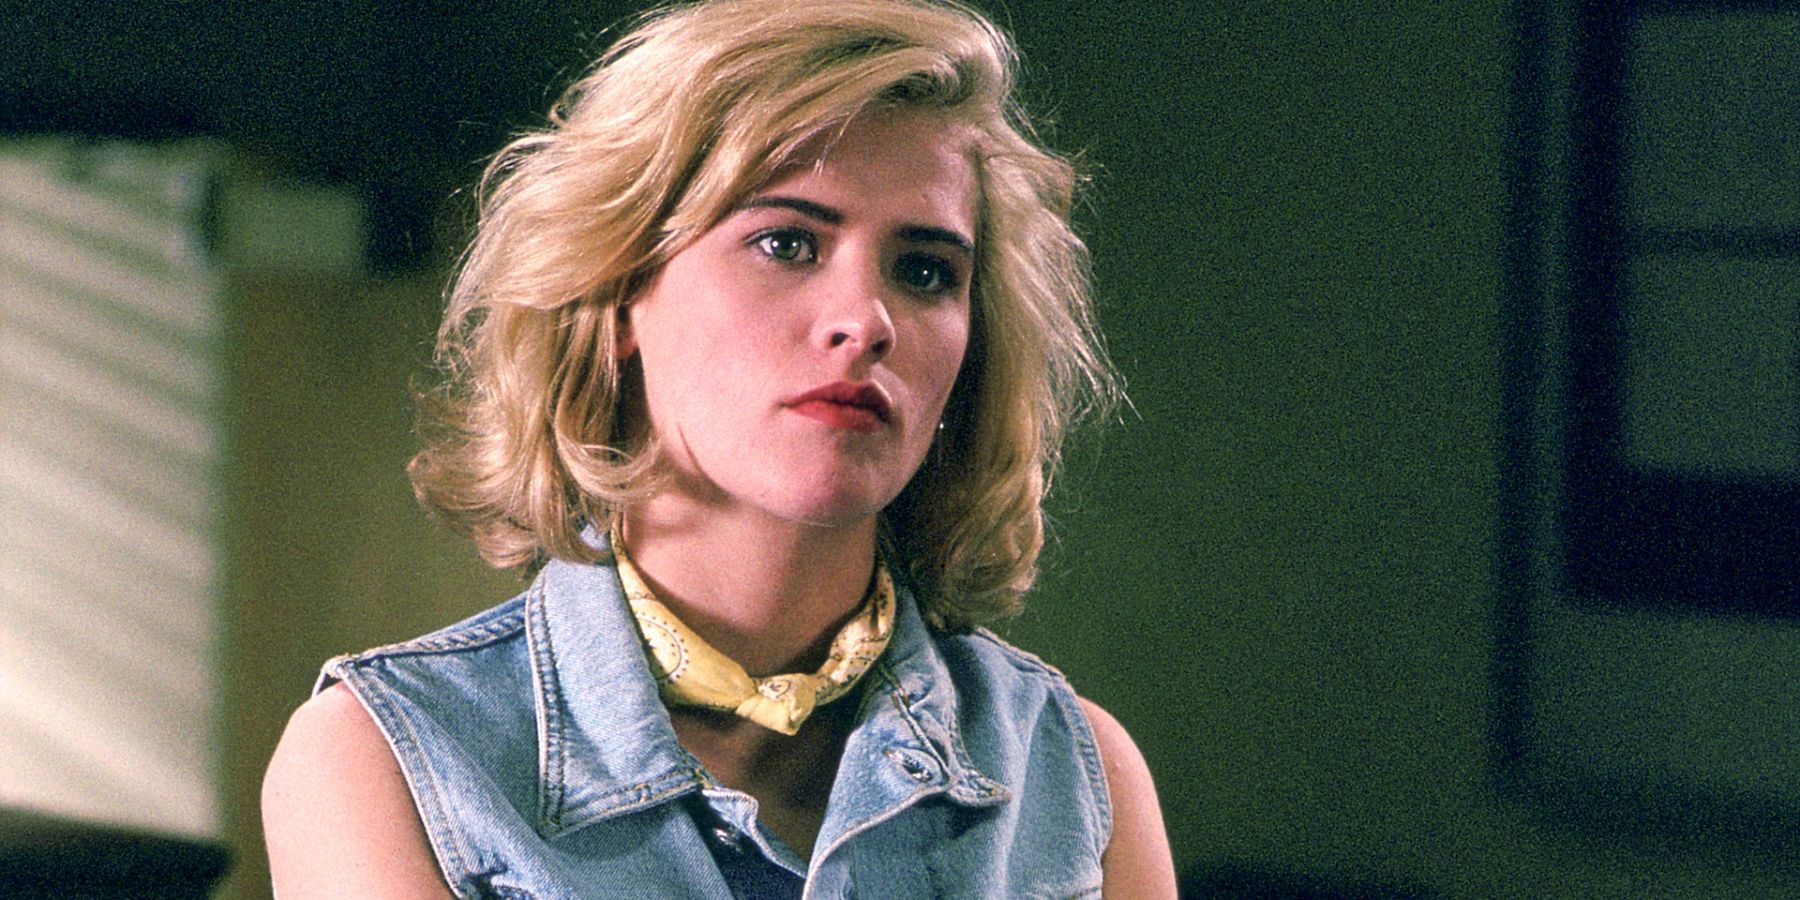 Kristy Swanson as Buffy Summers in Buffy The Vampire Slayer